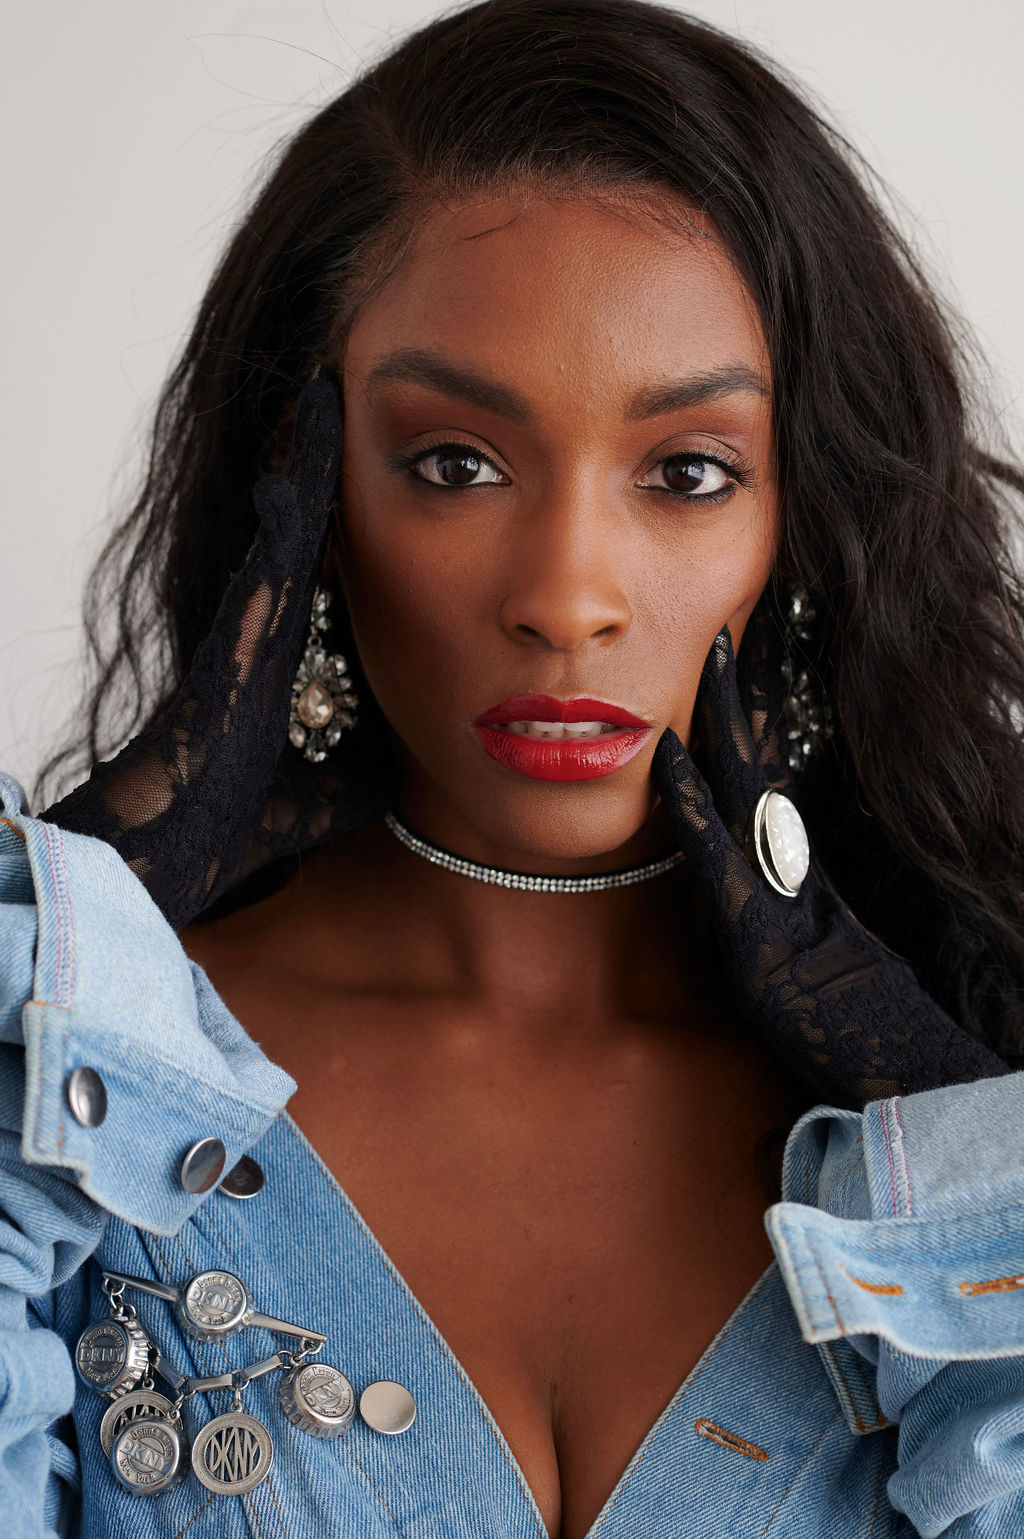 Annjulia Smalls In Y Project-styled by melissa-lcm-sheldon botler photography-denim jacket-elongated sleeves-high fashion-portrait-black model-los angeles